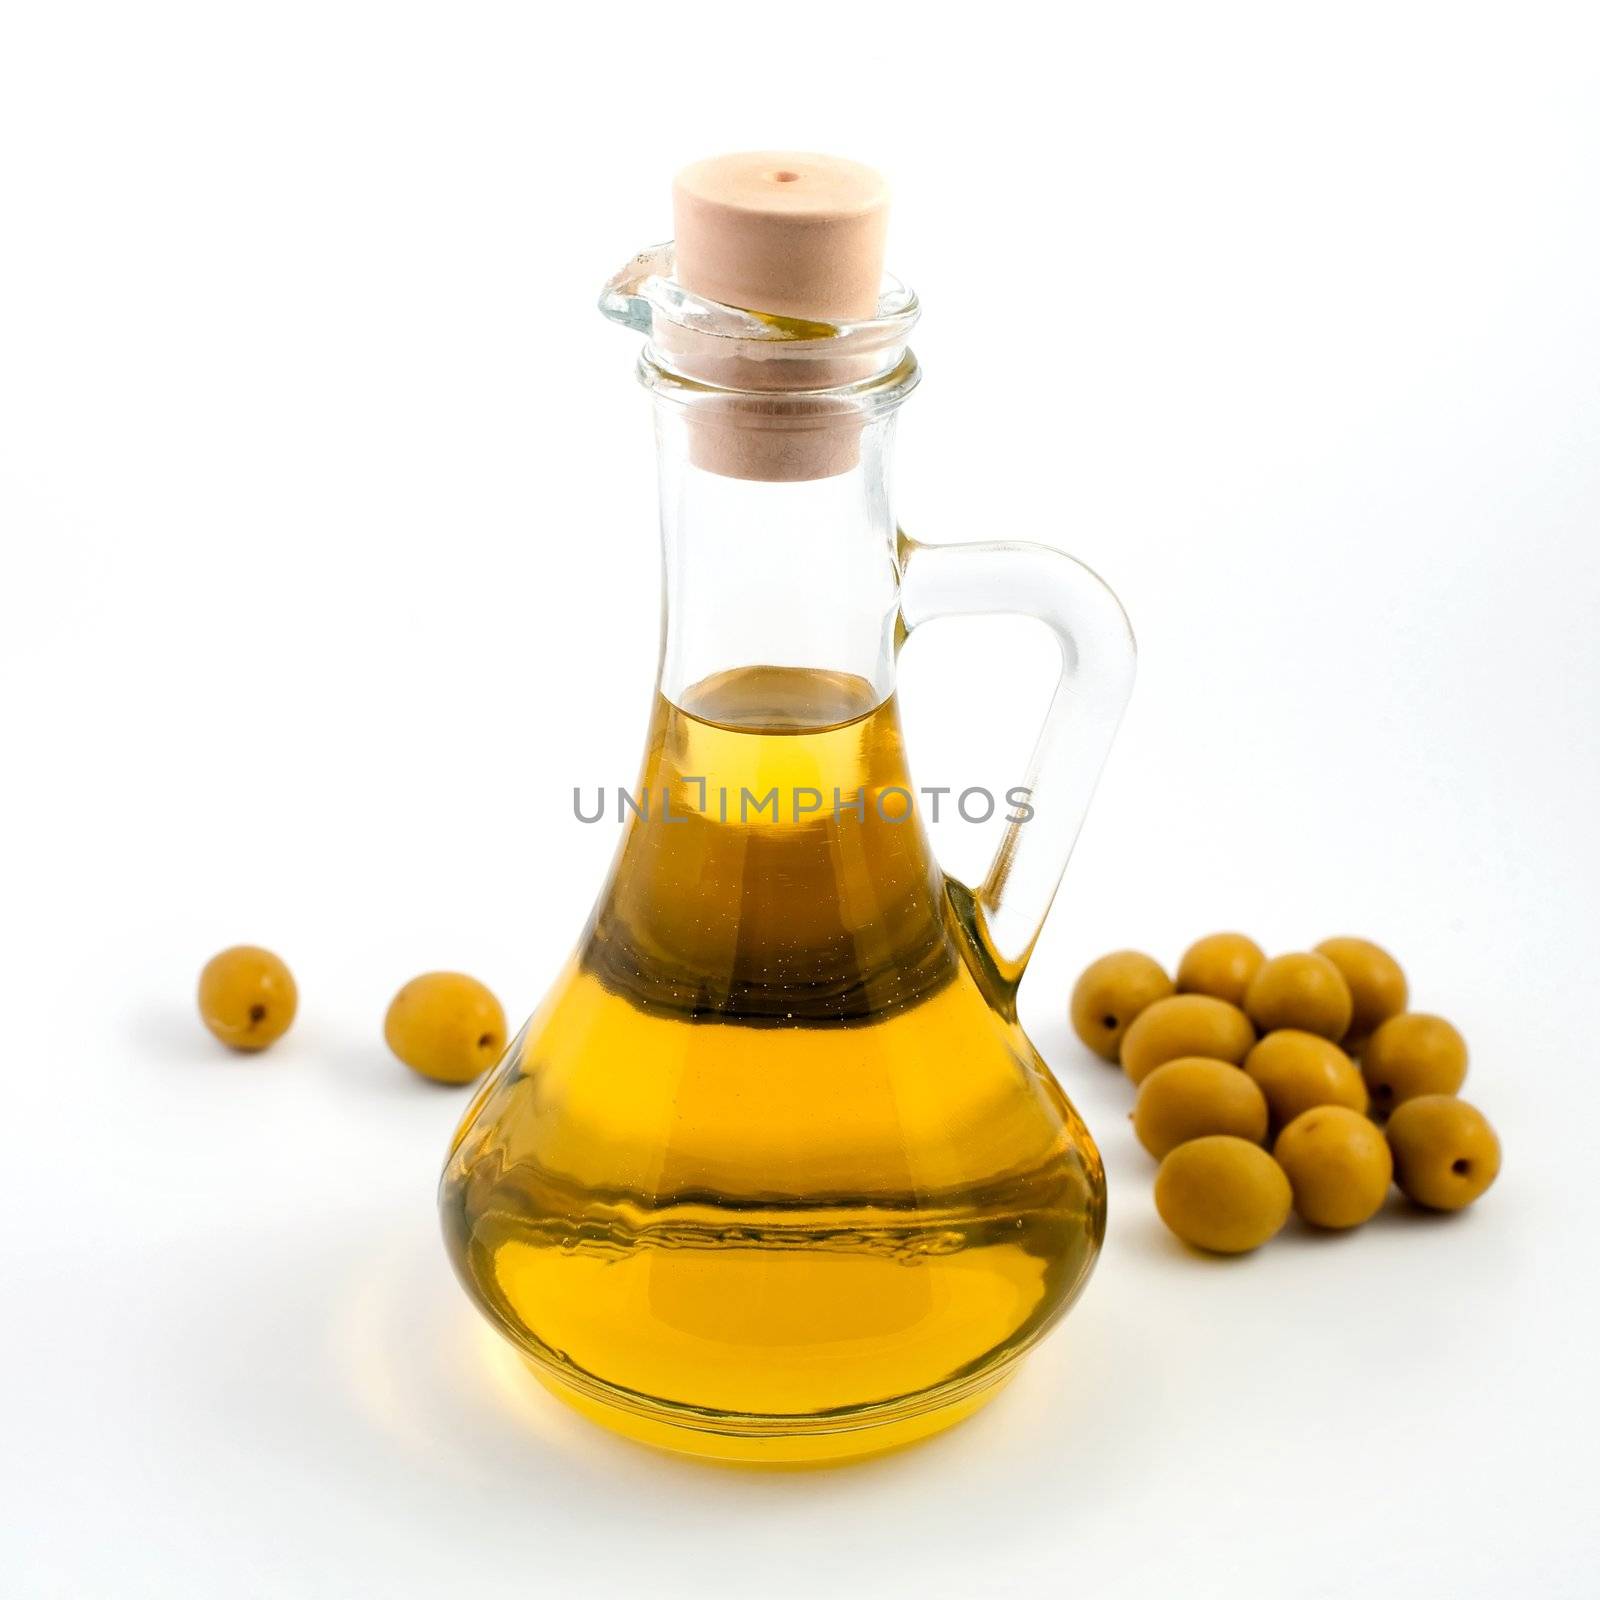 An image of green olives and bottle of oil 